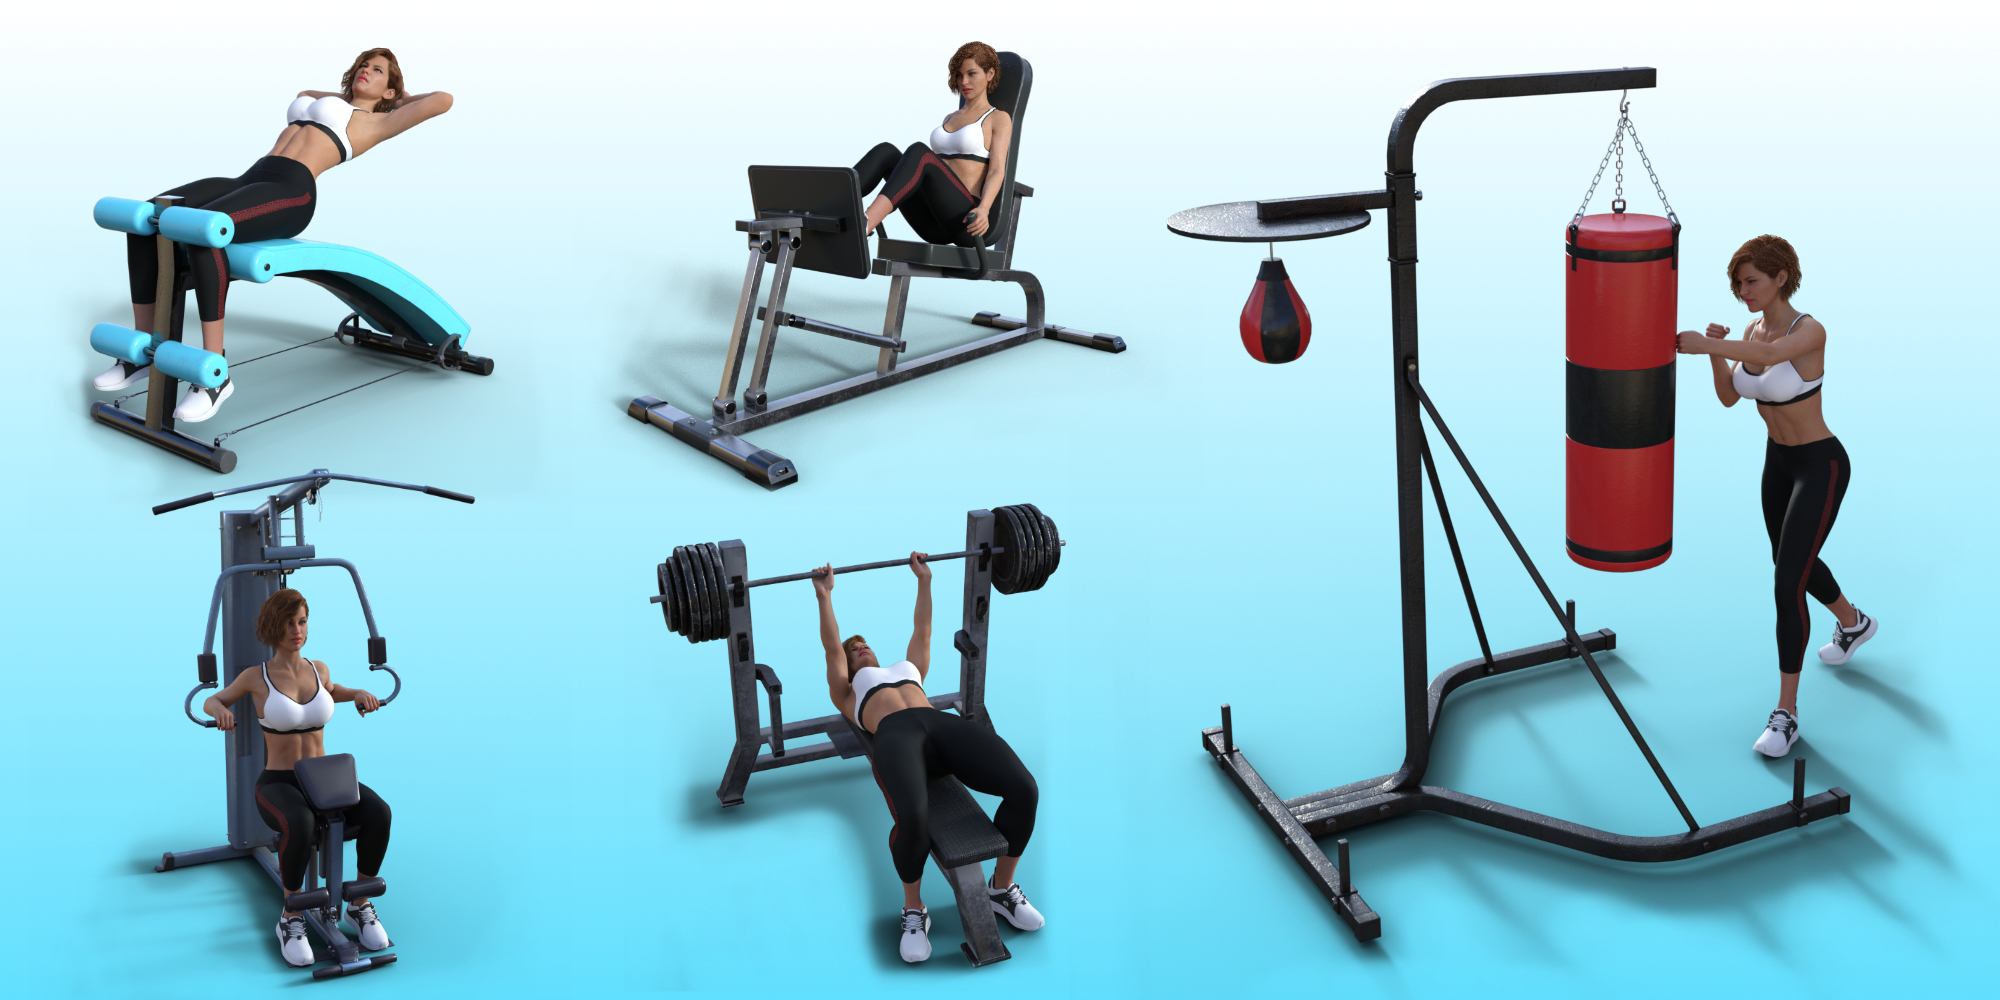 FG Fitness Equipment and Poses for Genesis 8 and 8.1 Females by: Fugazi1968Ironman, 3D Models by Daz 3D